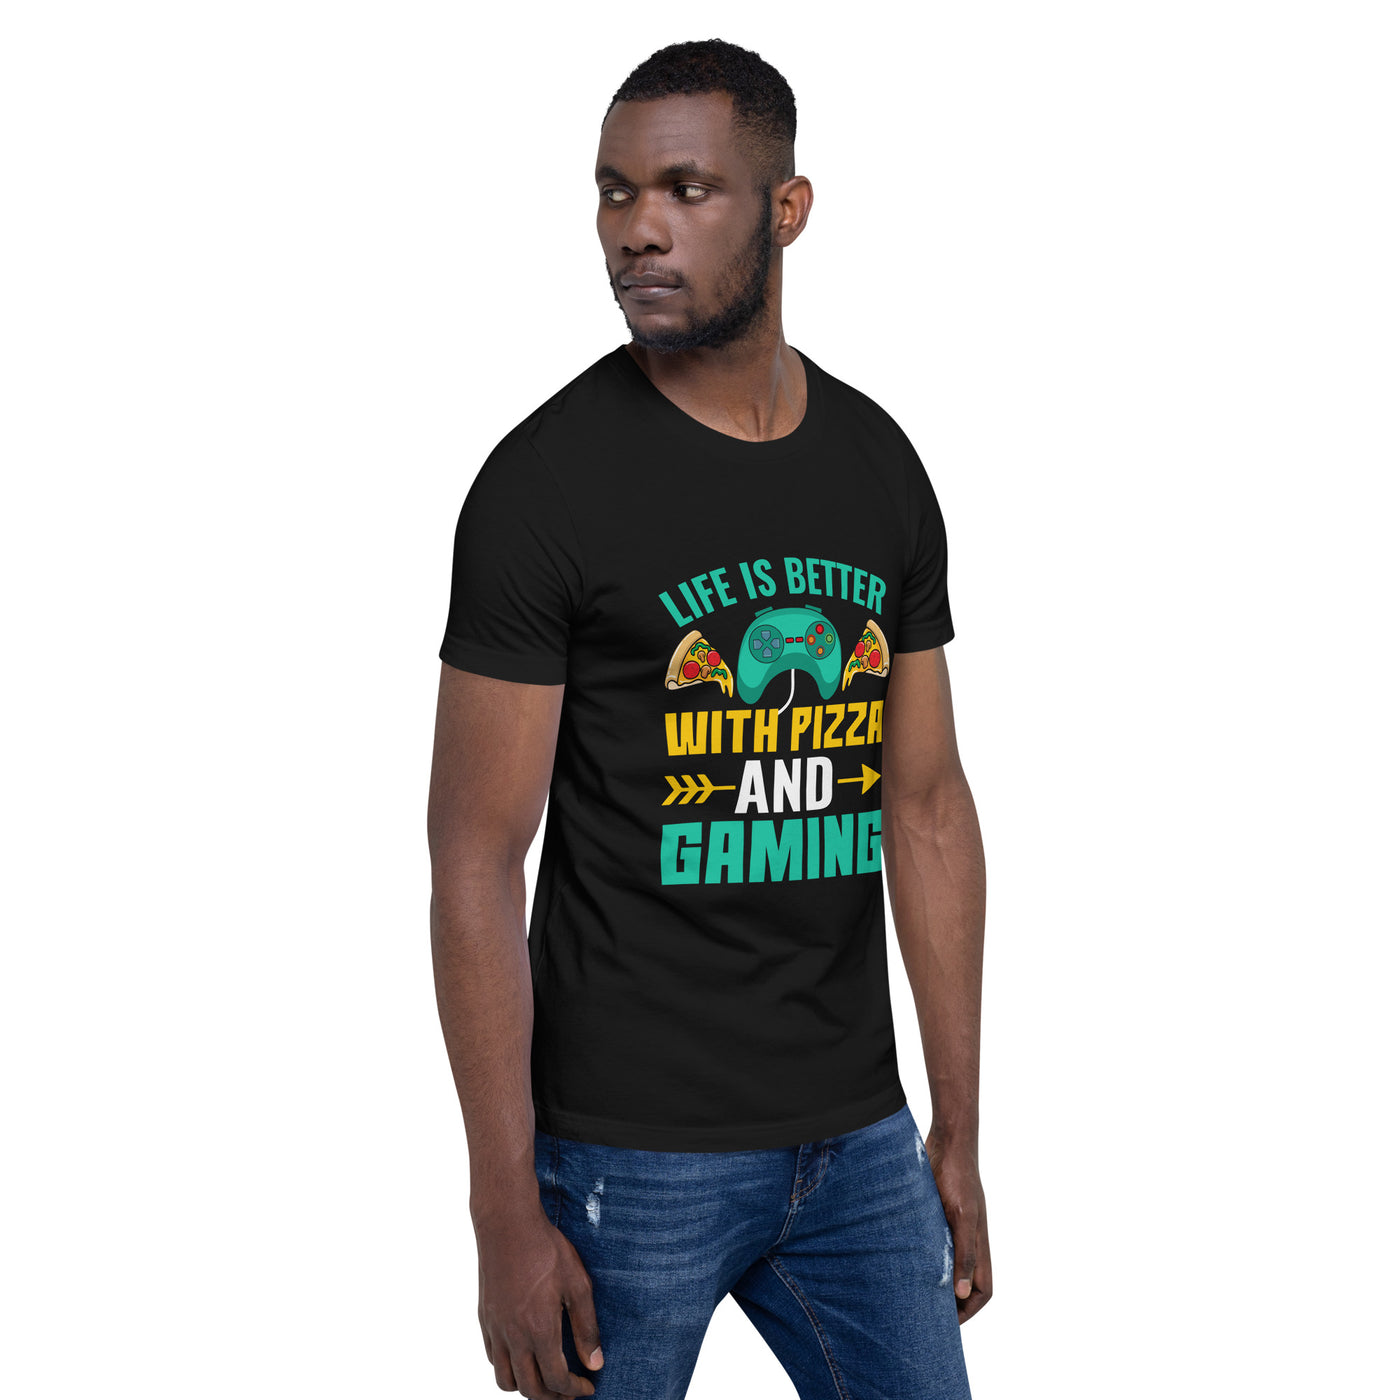 Life is Better With Pizza and Gaming Rima 14 - Unisex t-shirt